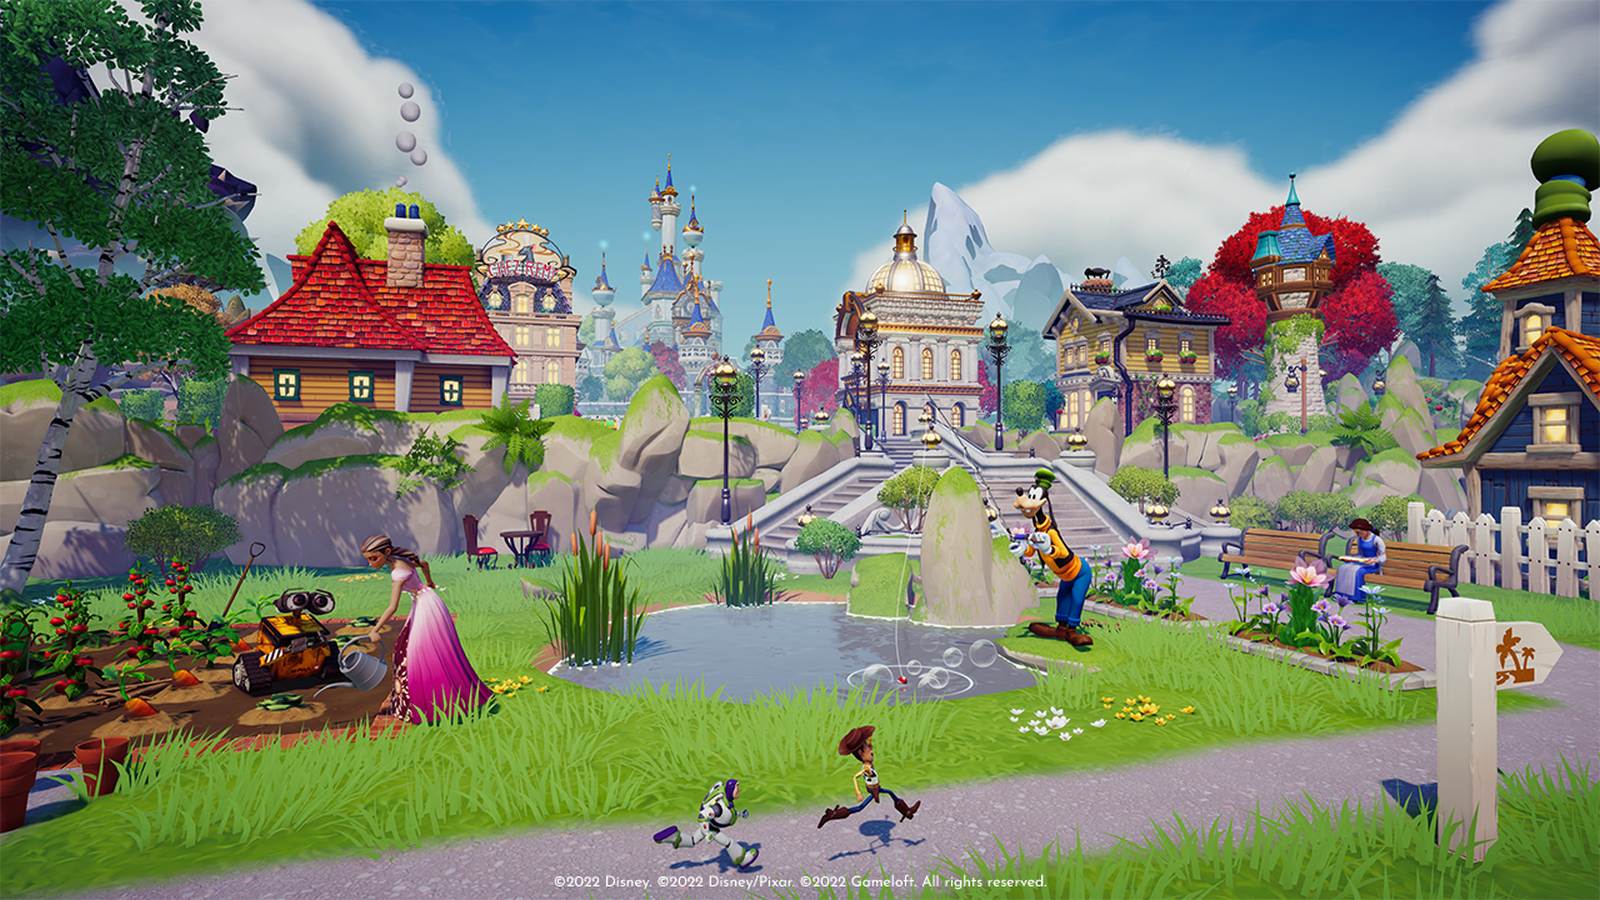 I feel Disney’s Dreamlight Valley will likely be sticking round for some time